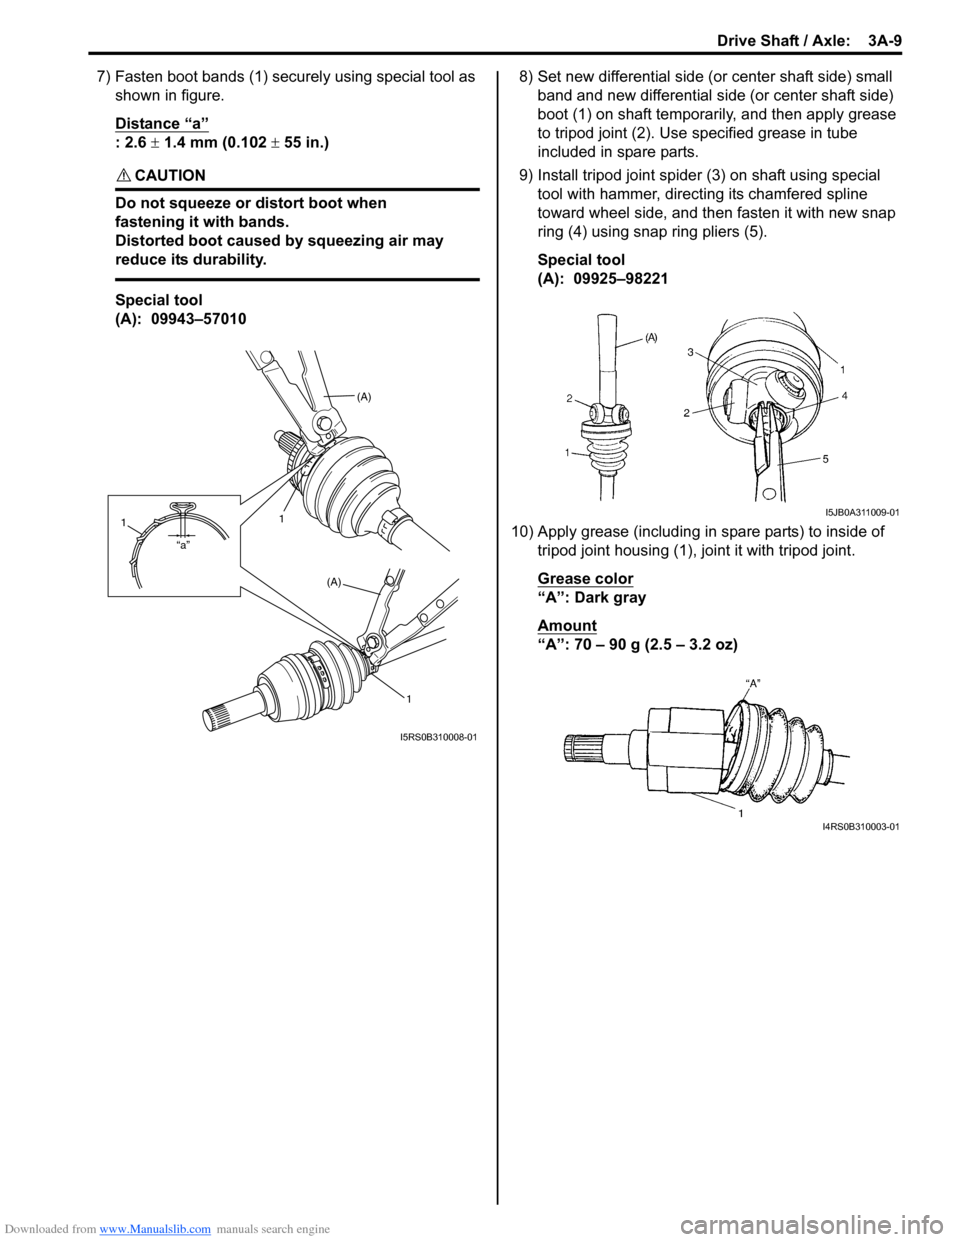 SUZUKI SWIFT 2006 2.G Service Workshop Manual Downloaded from www.Manualslib.com manuals search engine Drive Shaft / Axle:  3A-9
7) Fasten boot bands (1) securely using special tool as 
shown in figure.
Distance “a”
: 2.6 ±  1.4 mm (0.102 ±